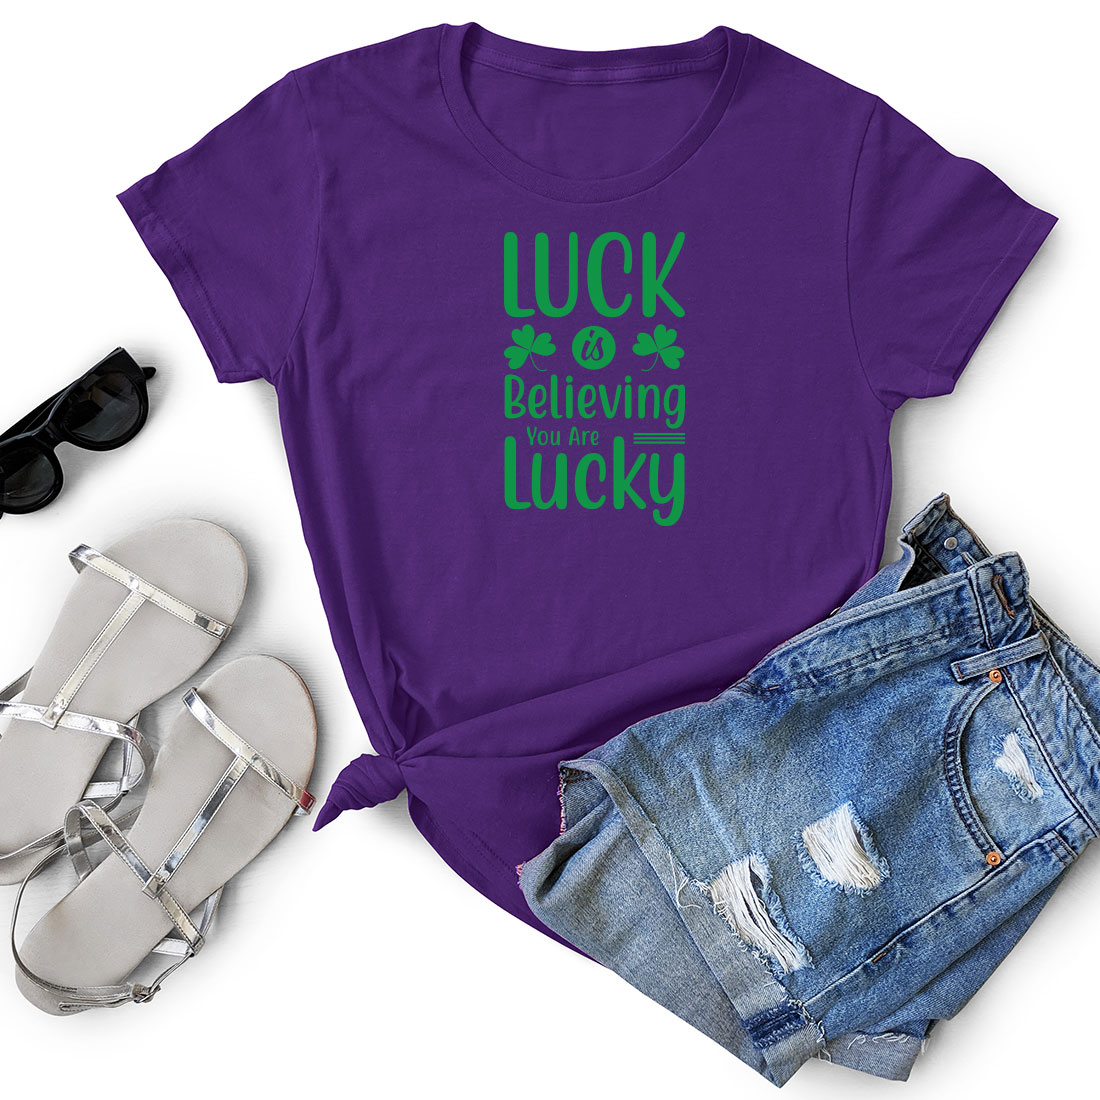 T - shirt that says luck is believing lucky.